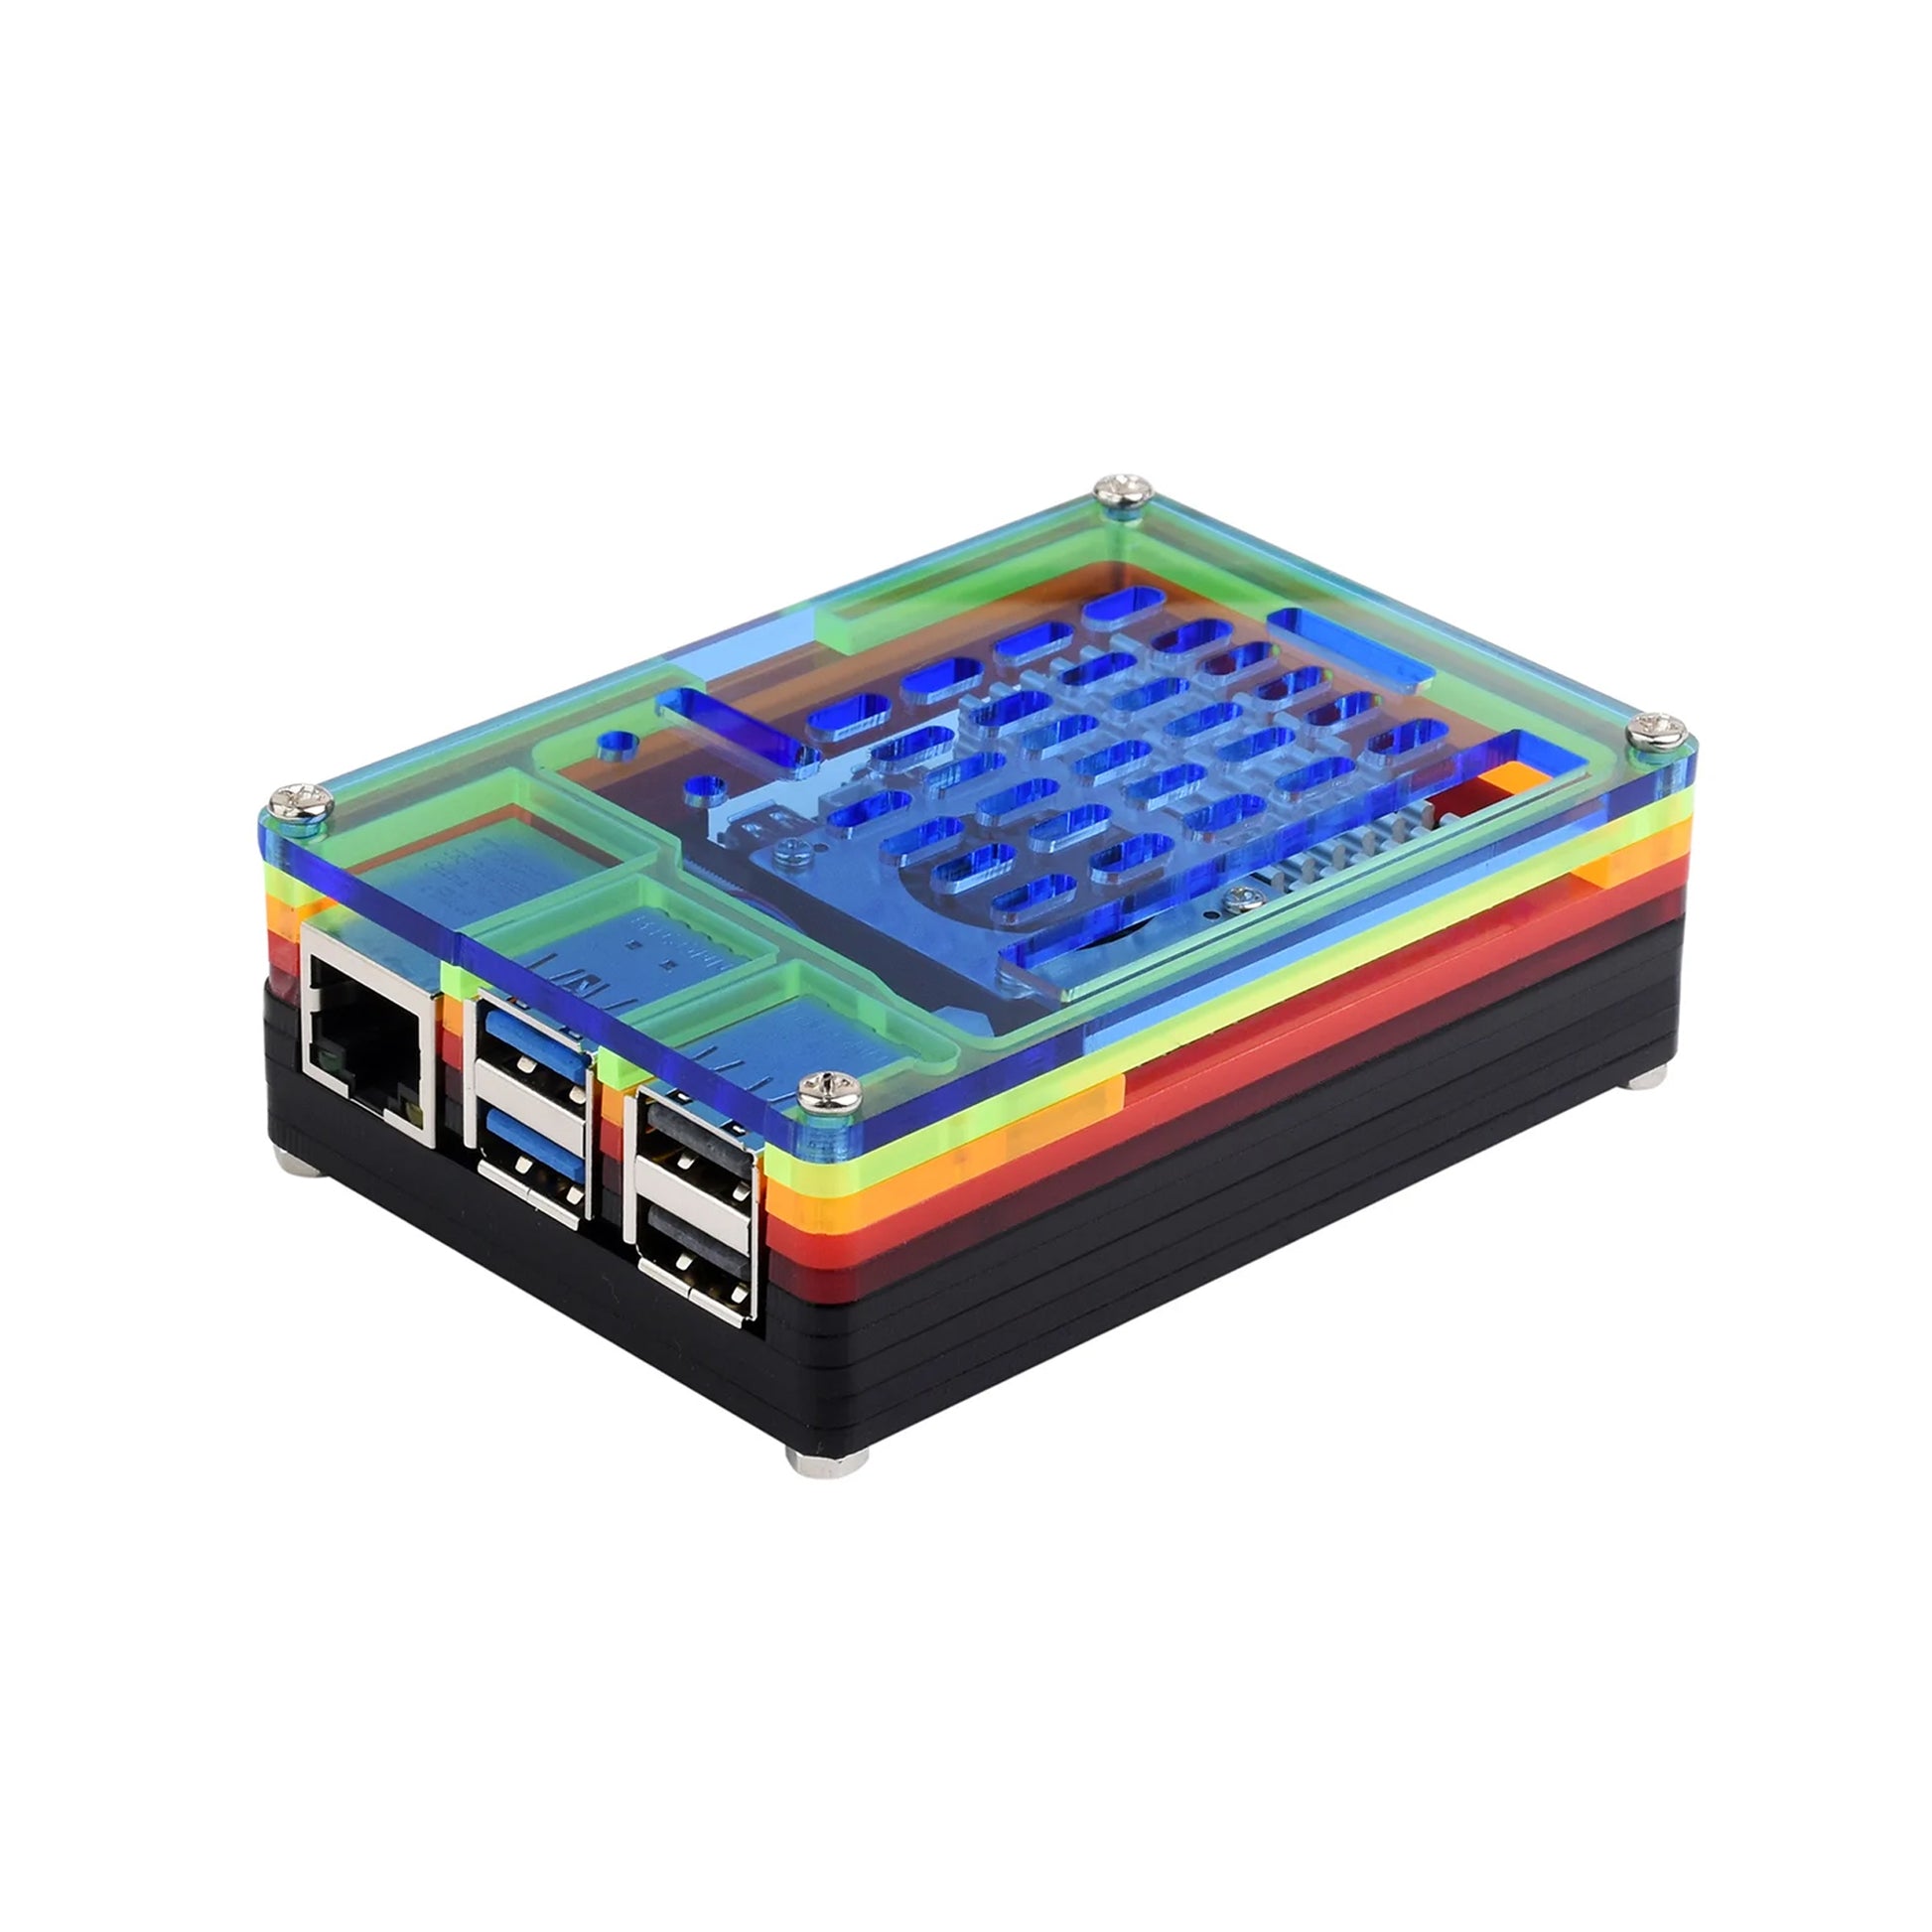 Raspberry Pi 5 Rainbow Case, Raspberry Pi 5 10-Layer Acrylic Case Colorful Translucent Acrylic Shell, Compatible with Active Cooler - RS5781 - REES52